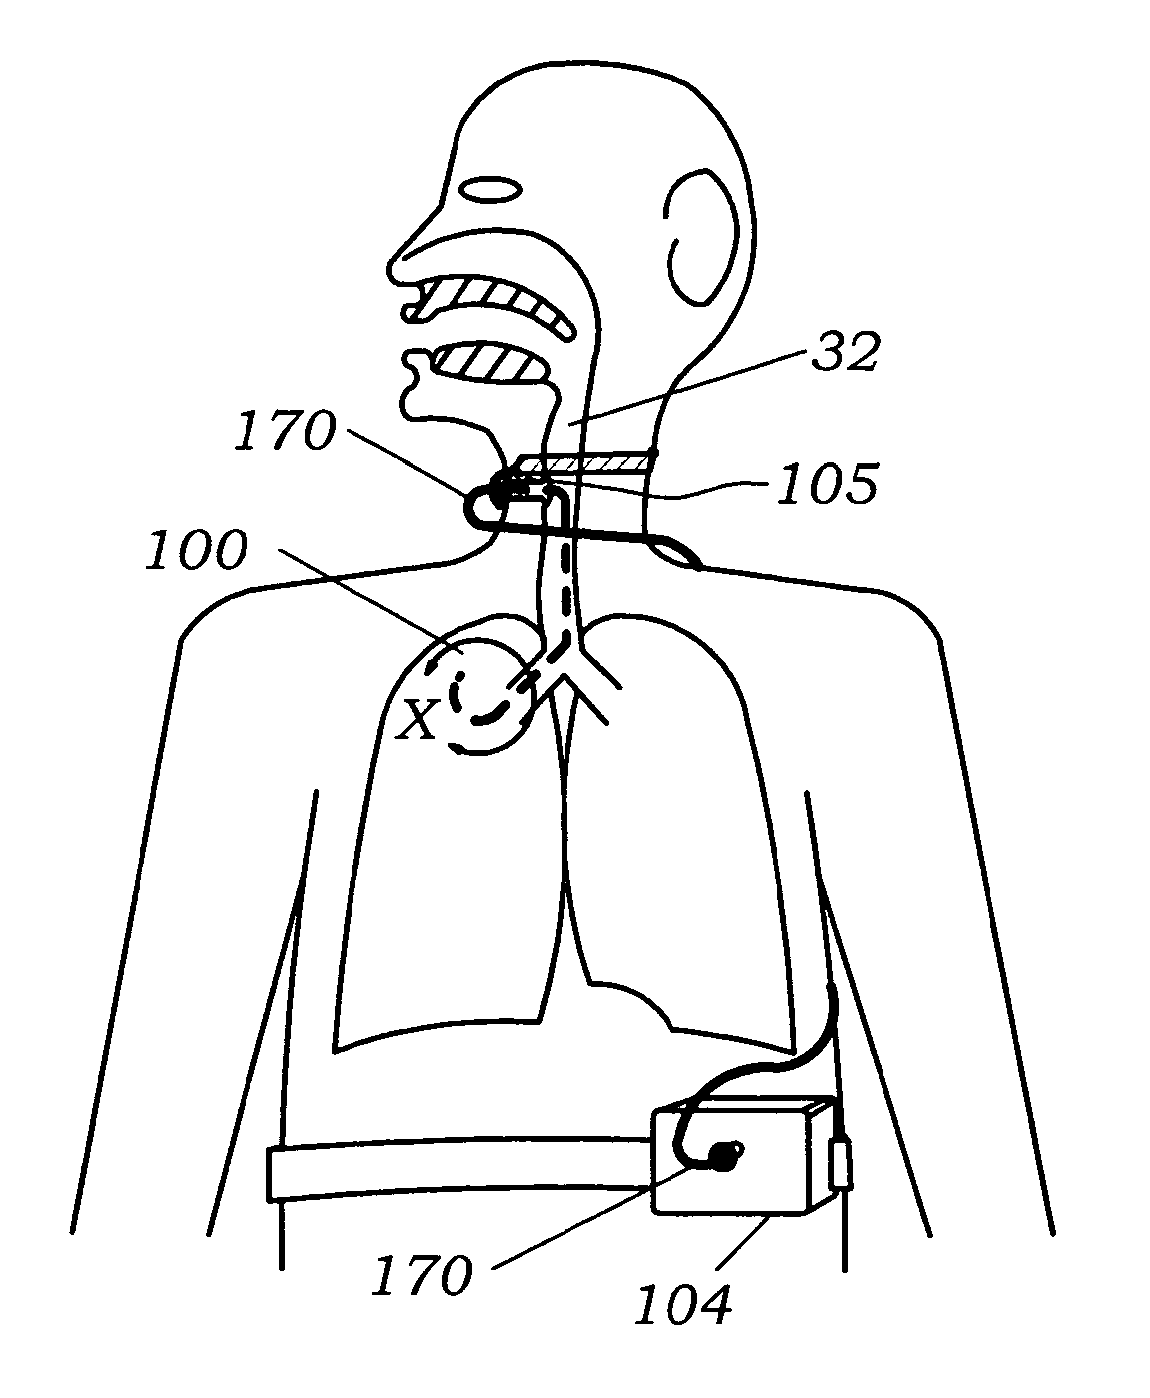 Methods, systems and devices for improving ventilation in a lung area